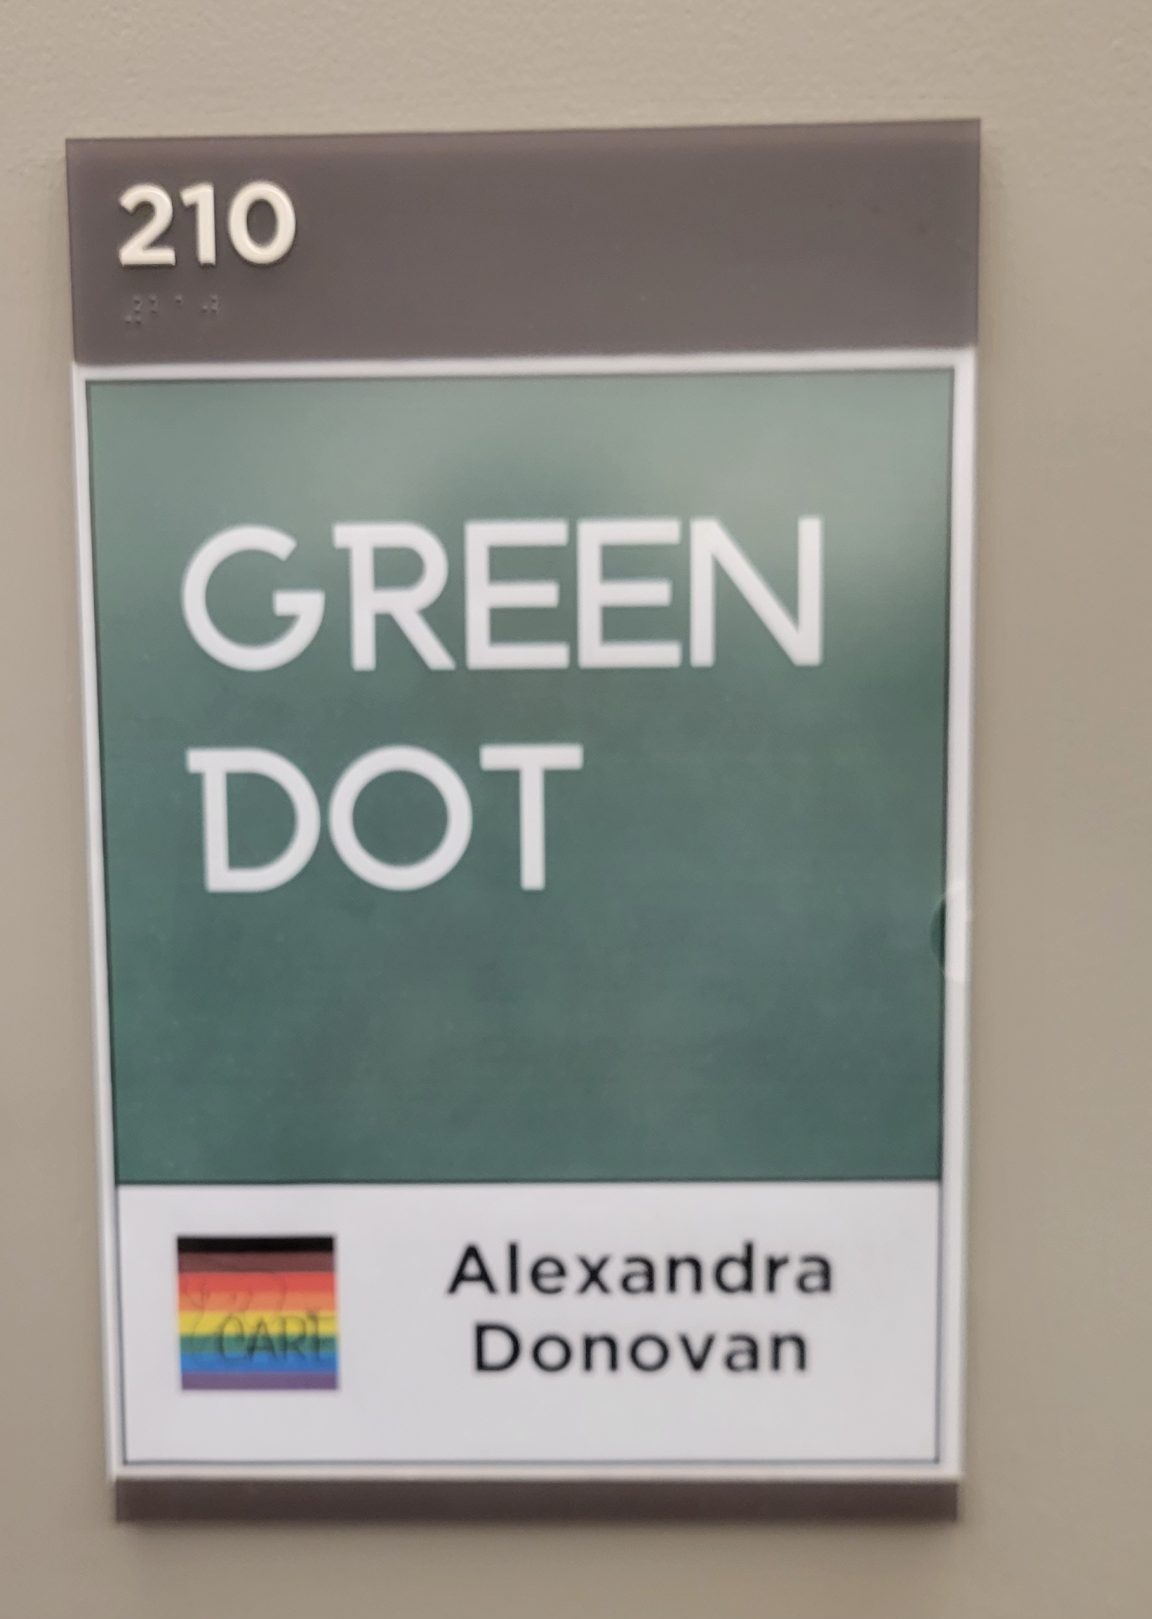 Green sign that says Green Dot. Underneath on a white background it says Alexandra Donovan.